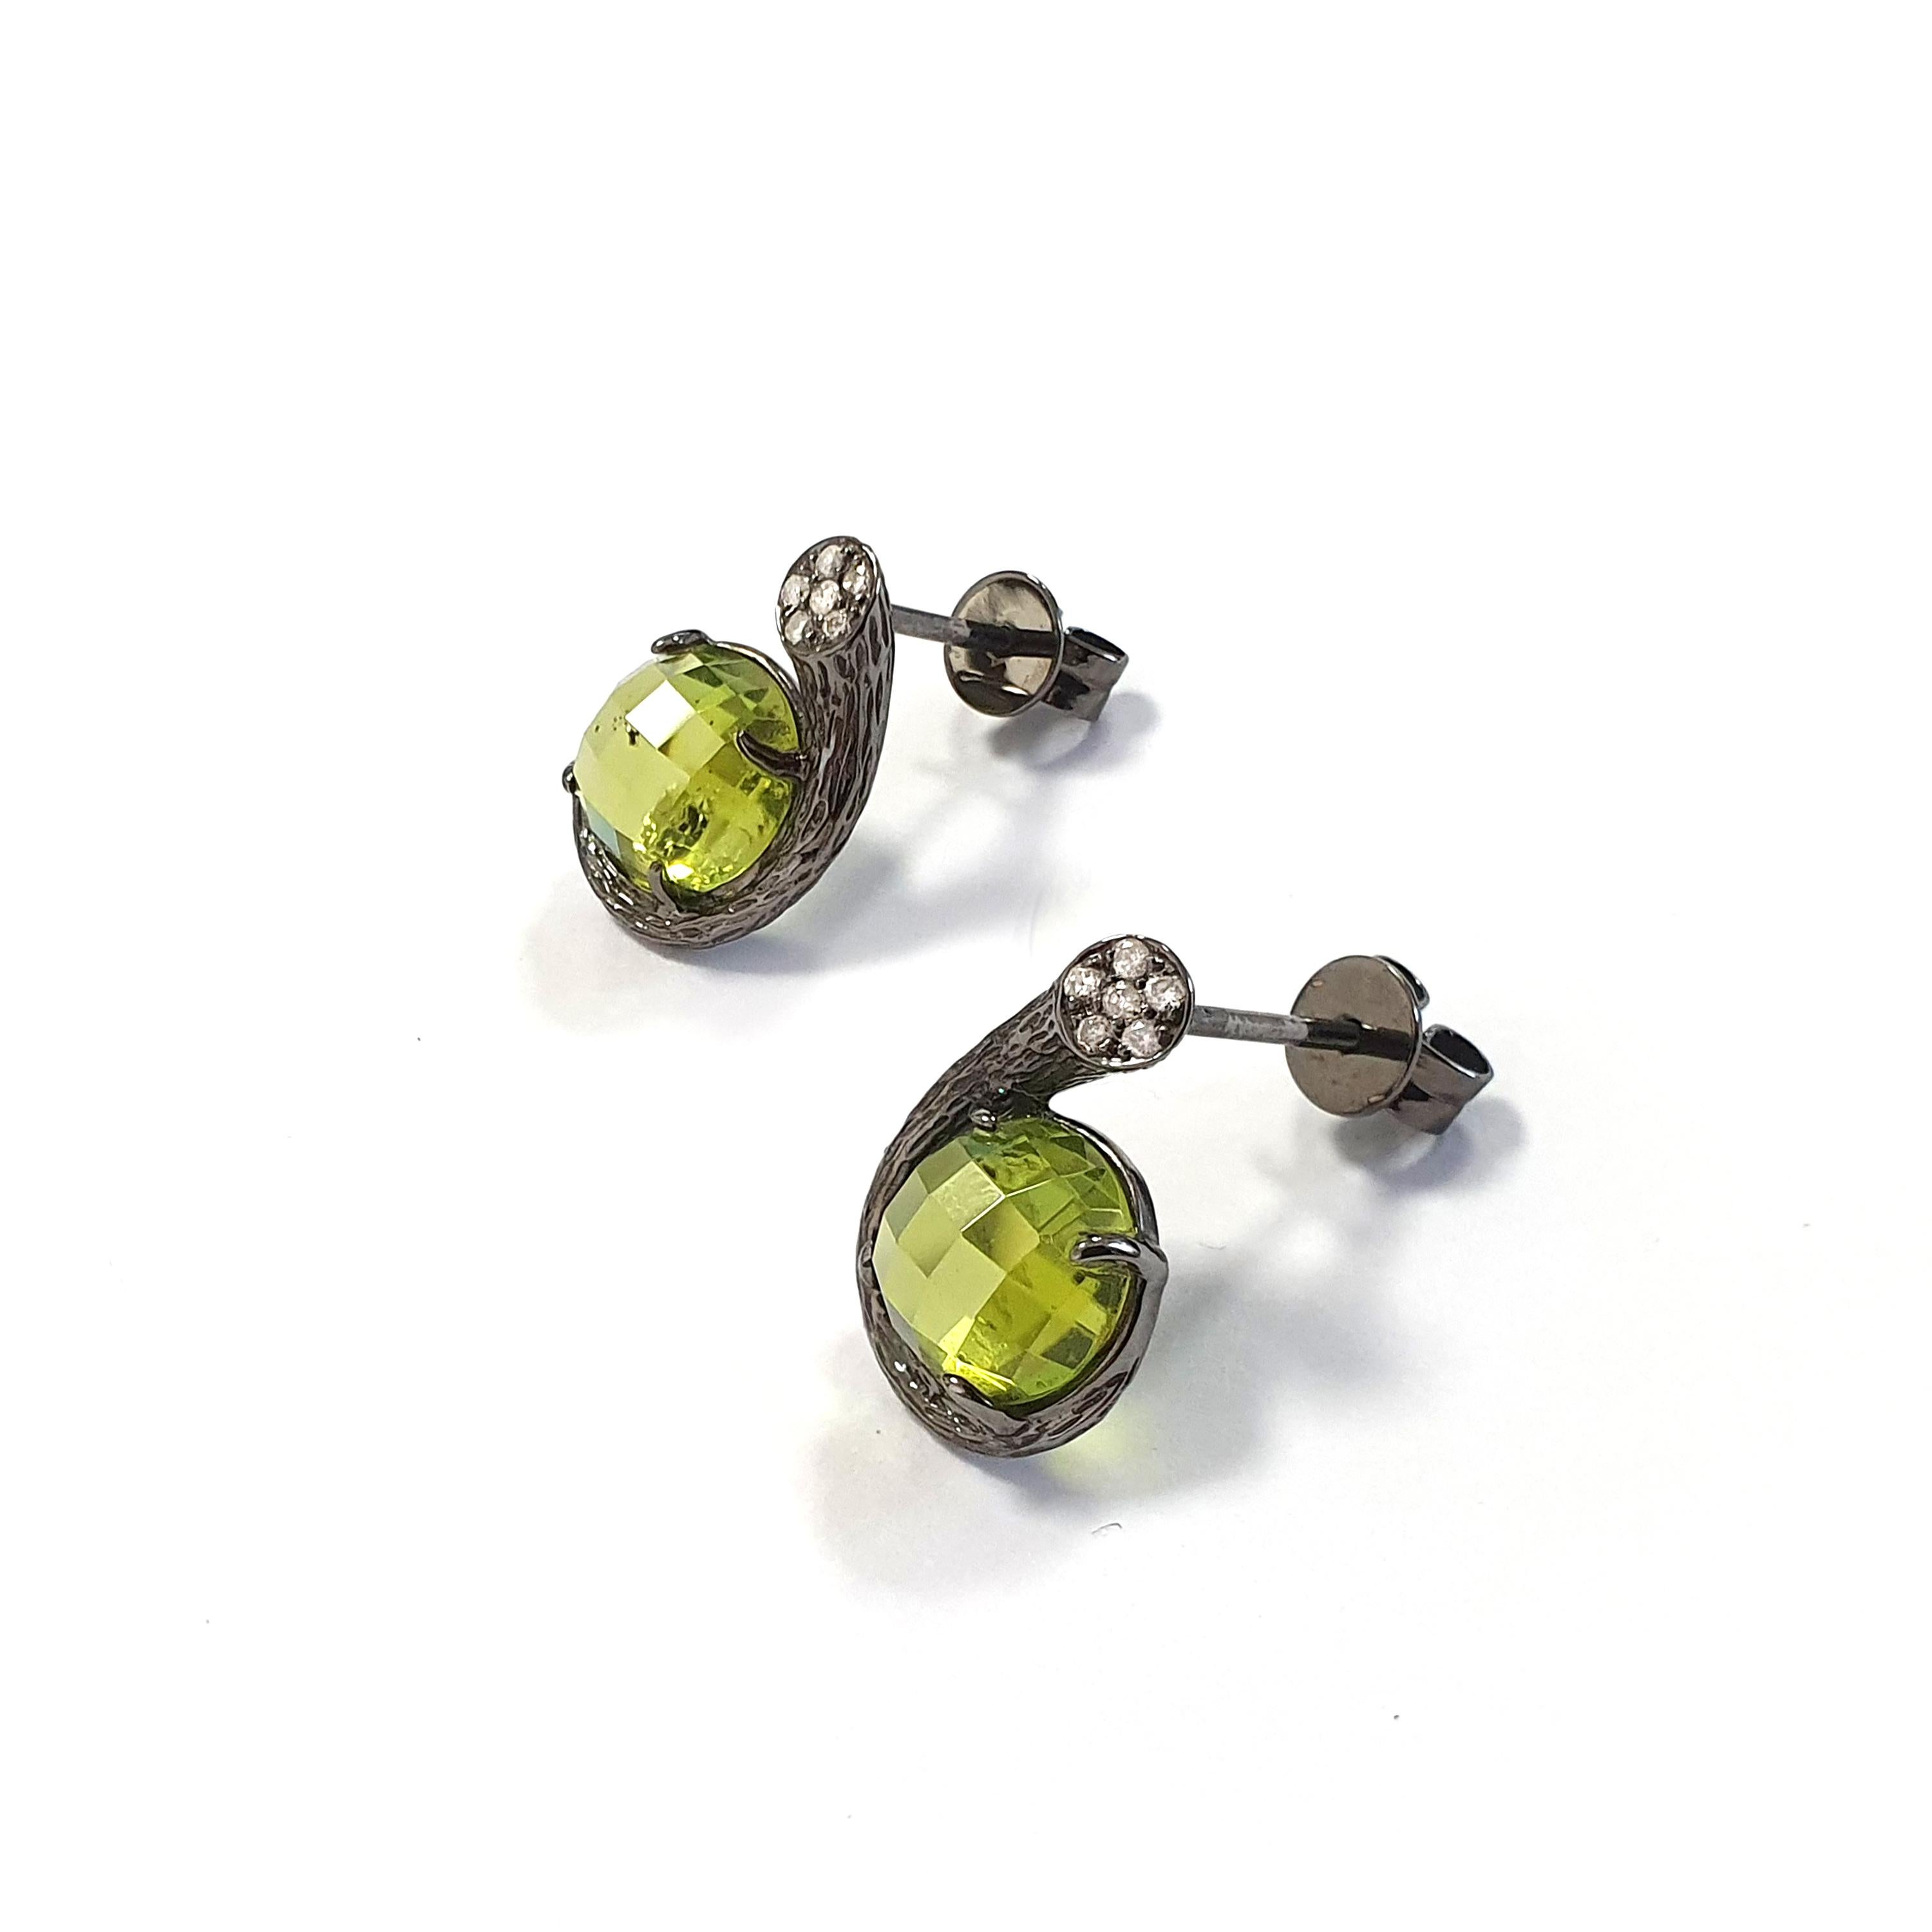 Description:
With the inspiration from Coral forming the sculptural essence of this collection, the look is edgy and dramatic. Dawn stud earrings with 2.4ct checkerboard-cut peridot and 0.1ct white diamonds, set in textured black rhodium on 18ct